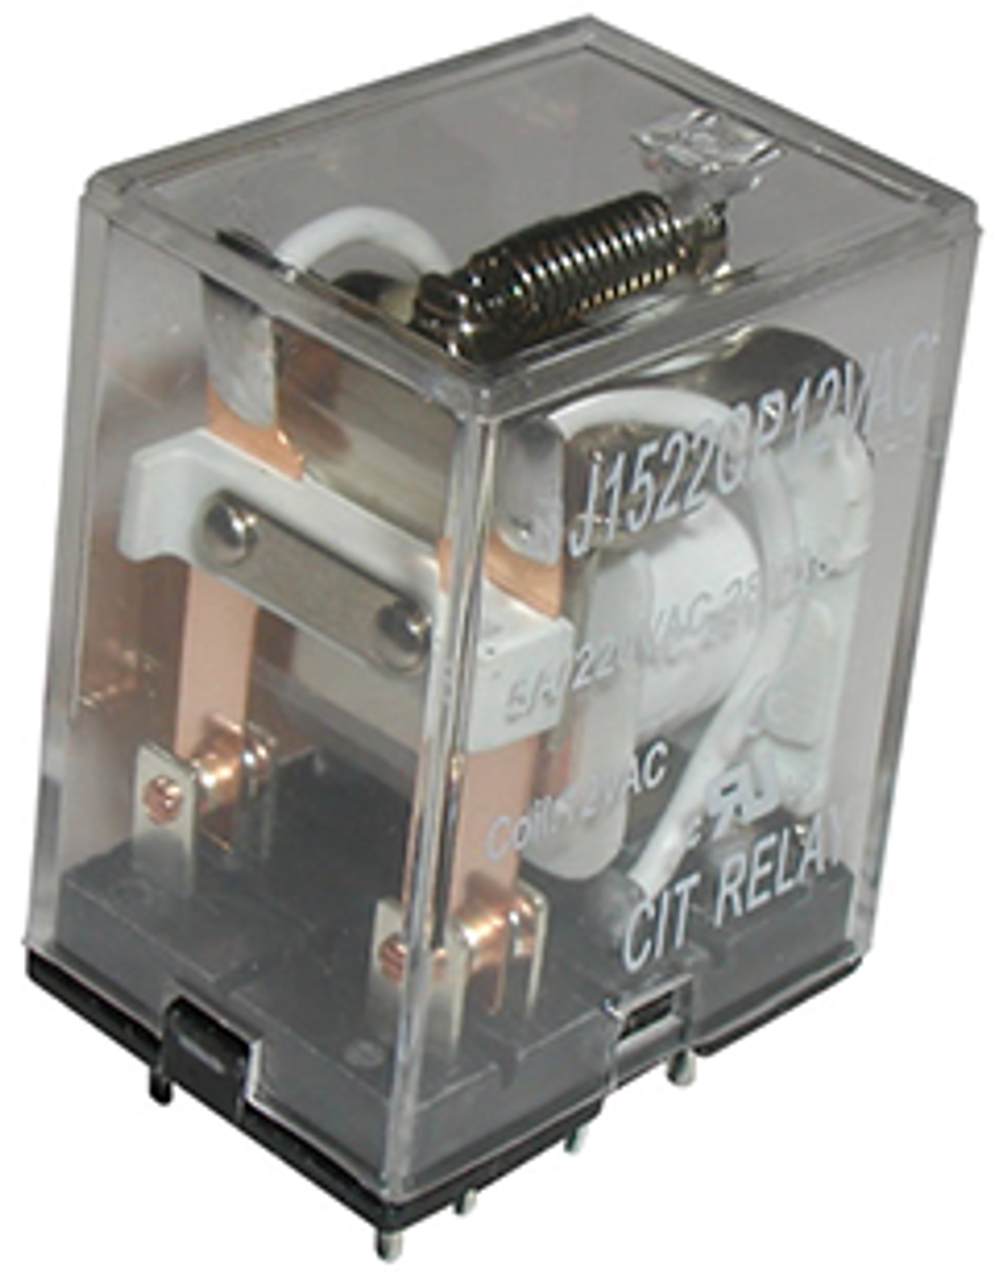 CIT Relay and Switch J1523CT12VAC Industrial Relays